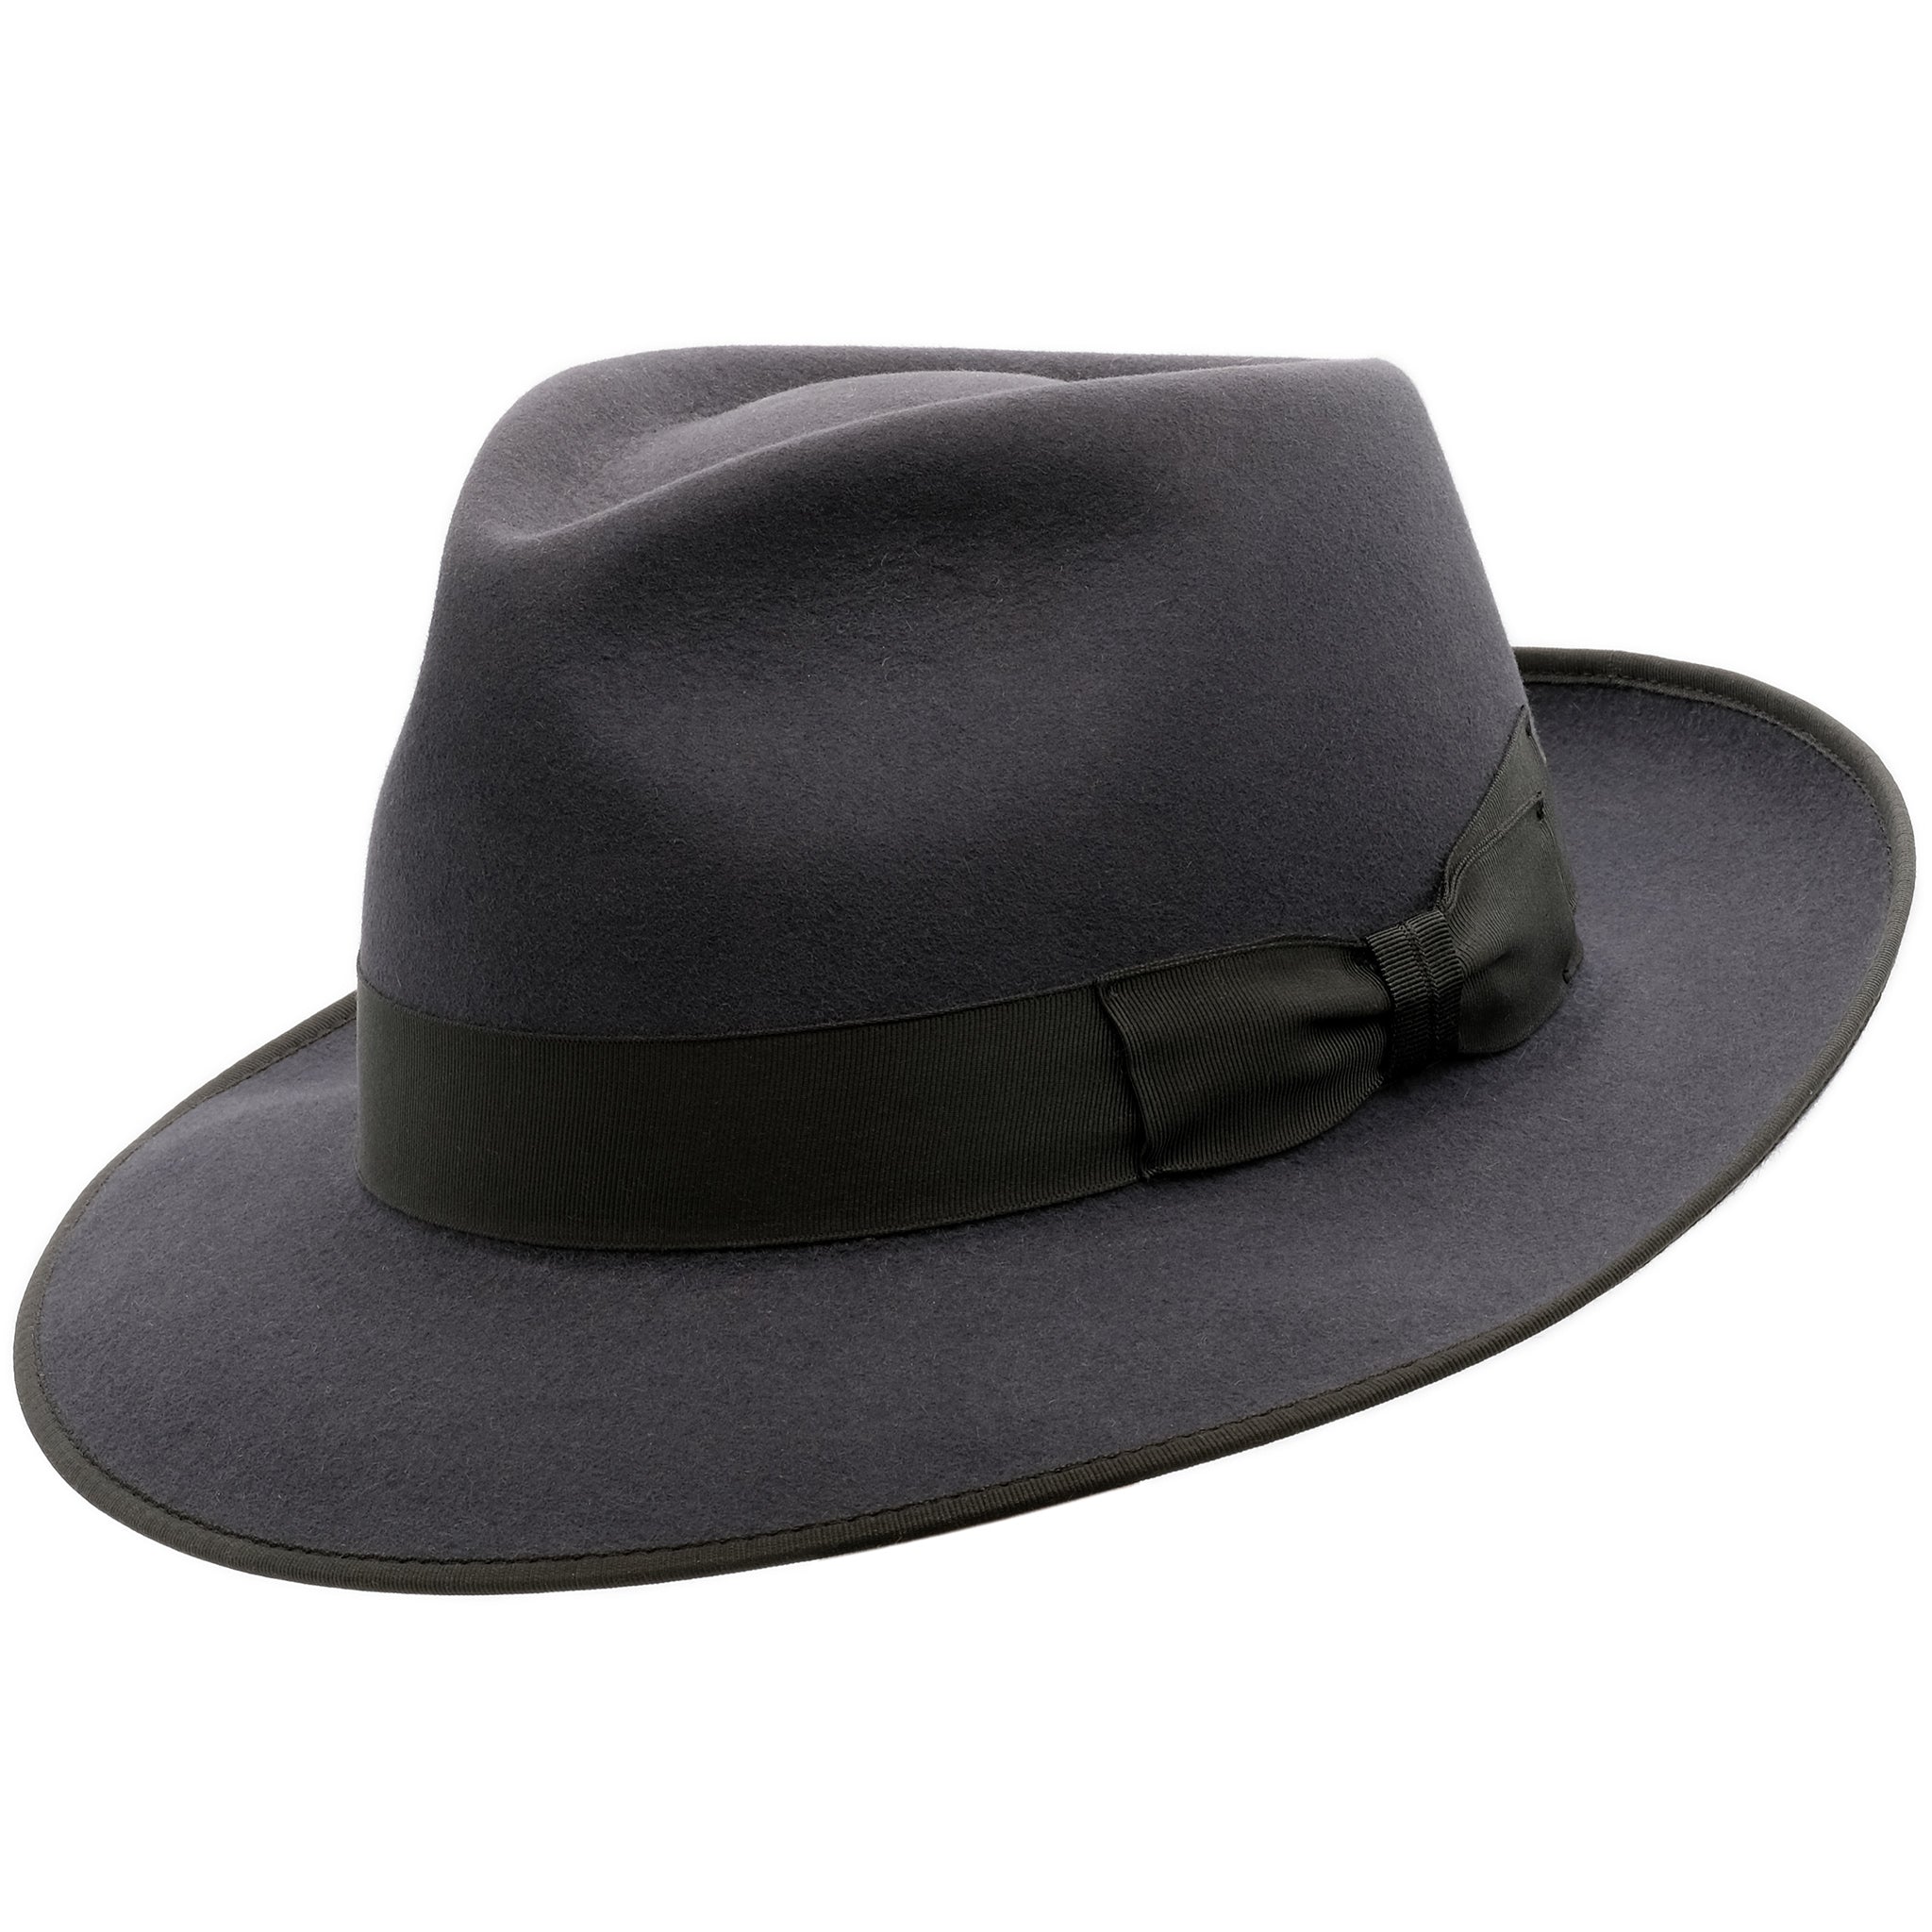 angle view of Akubra Stylemaster hat in Carbon Grey colour